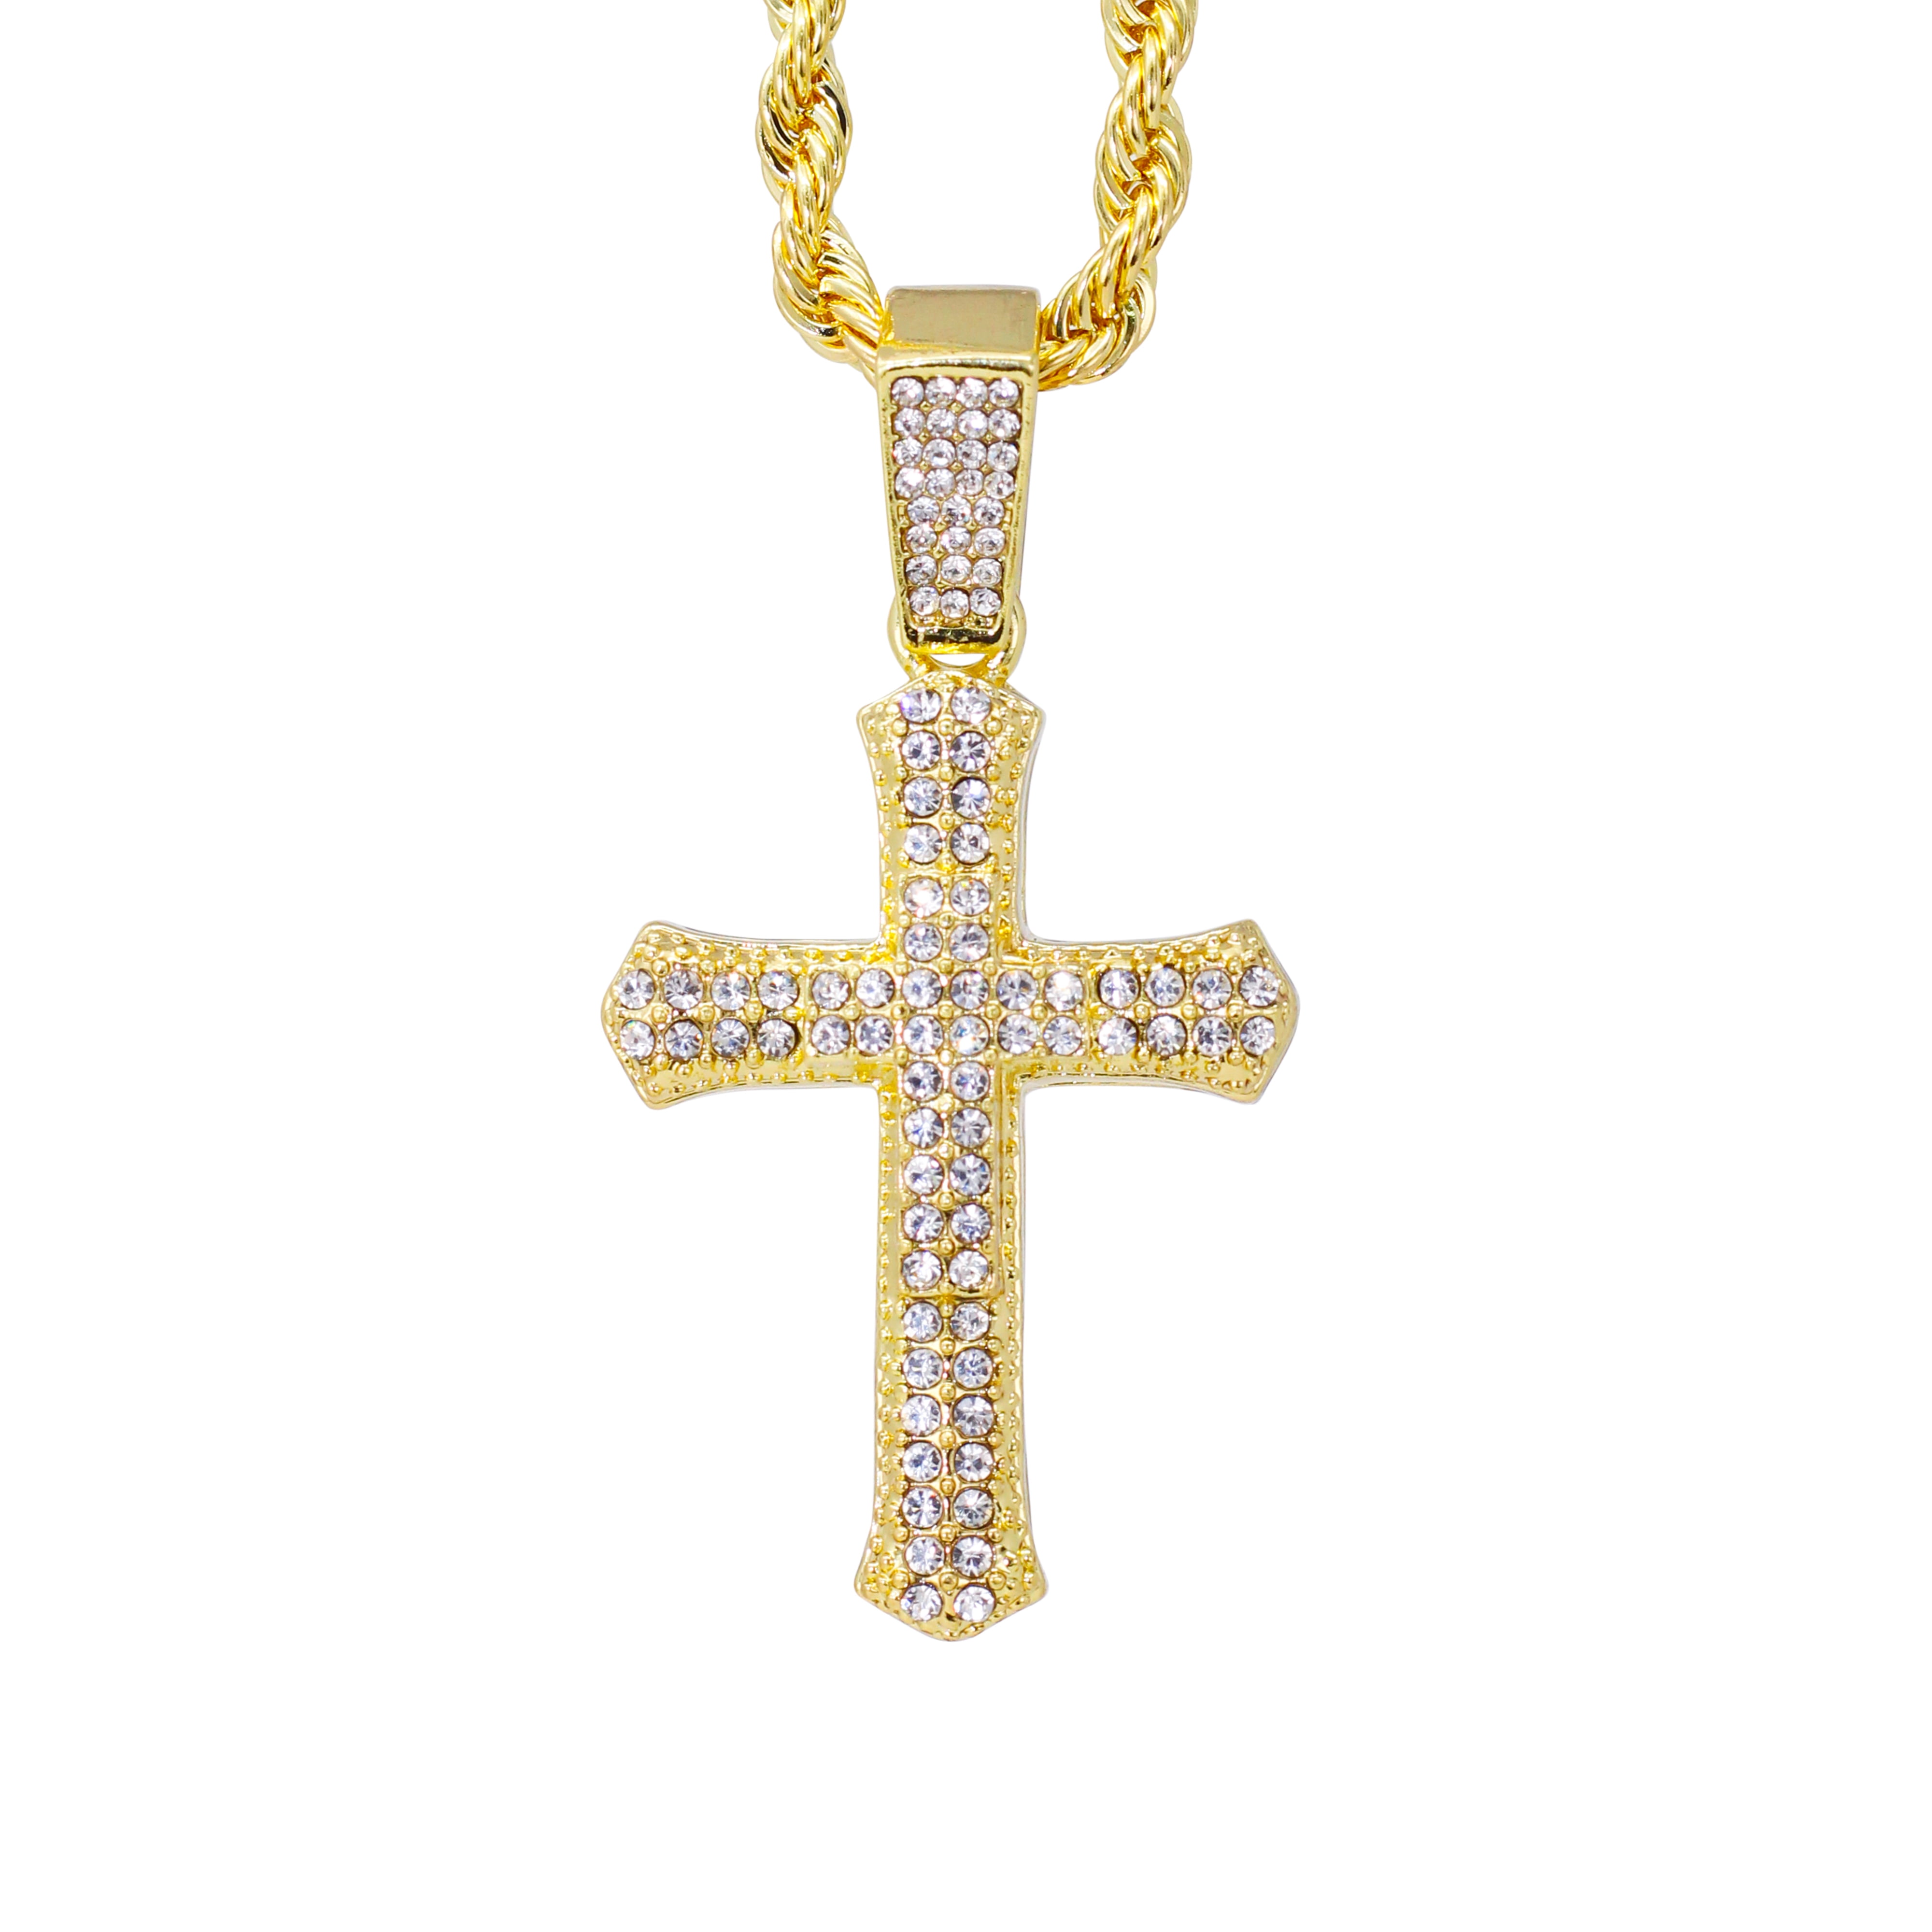 14K White Gold Plated Simulated Diamond Studded Religious Pendant Necklace With Chain Jewelry 